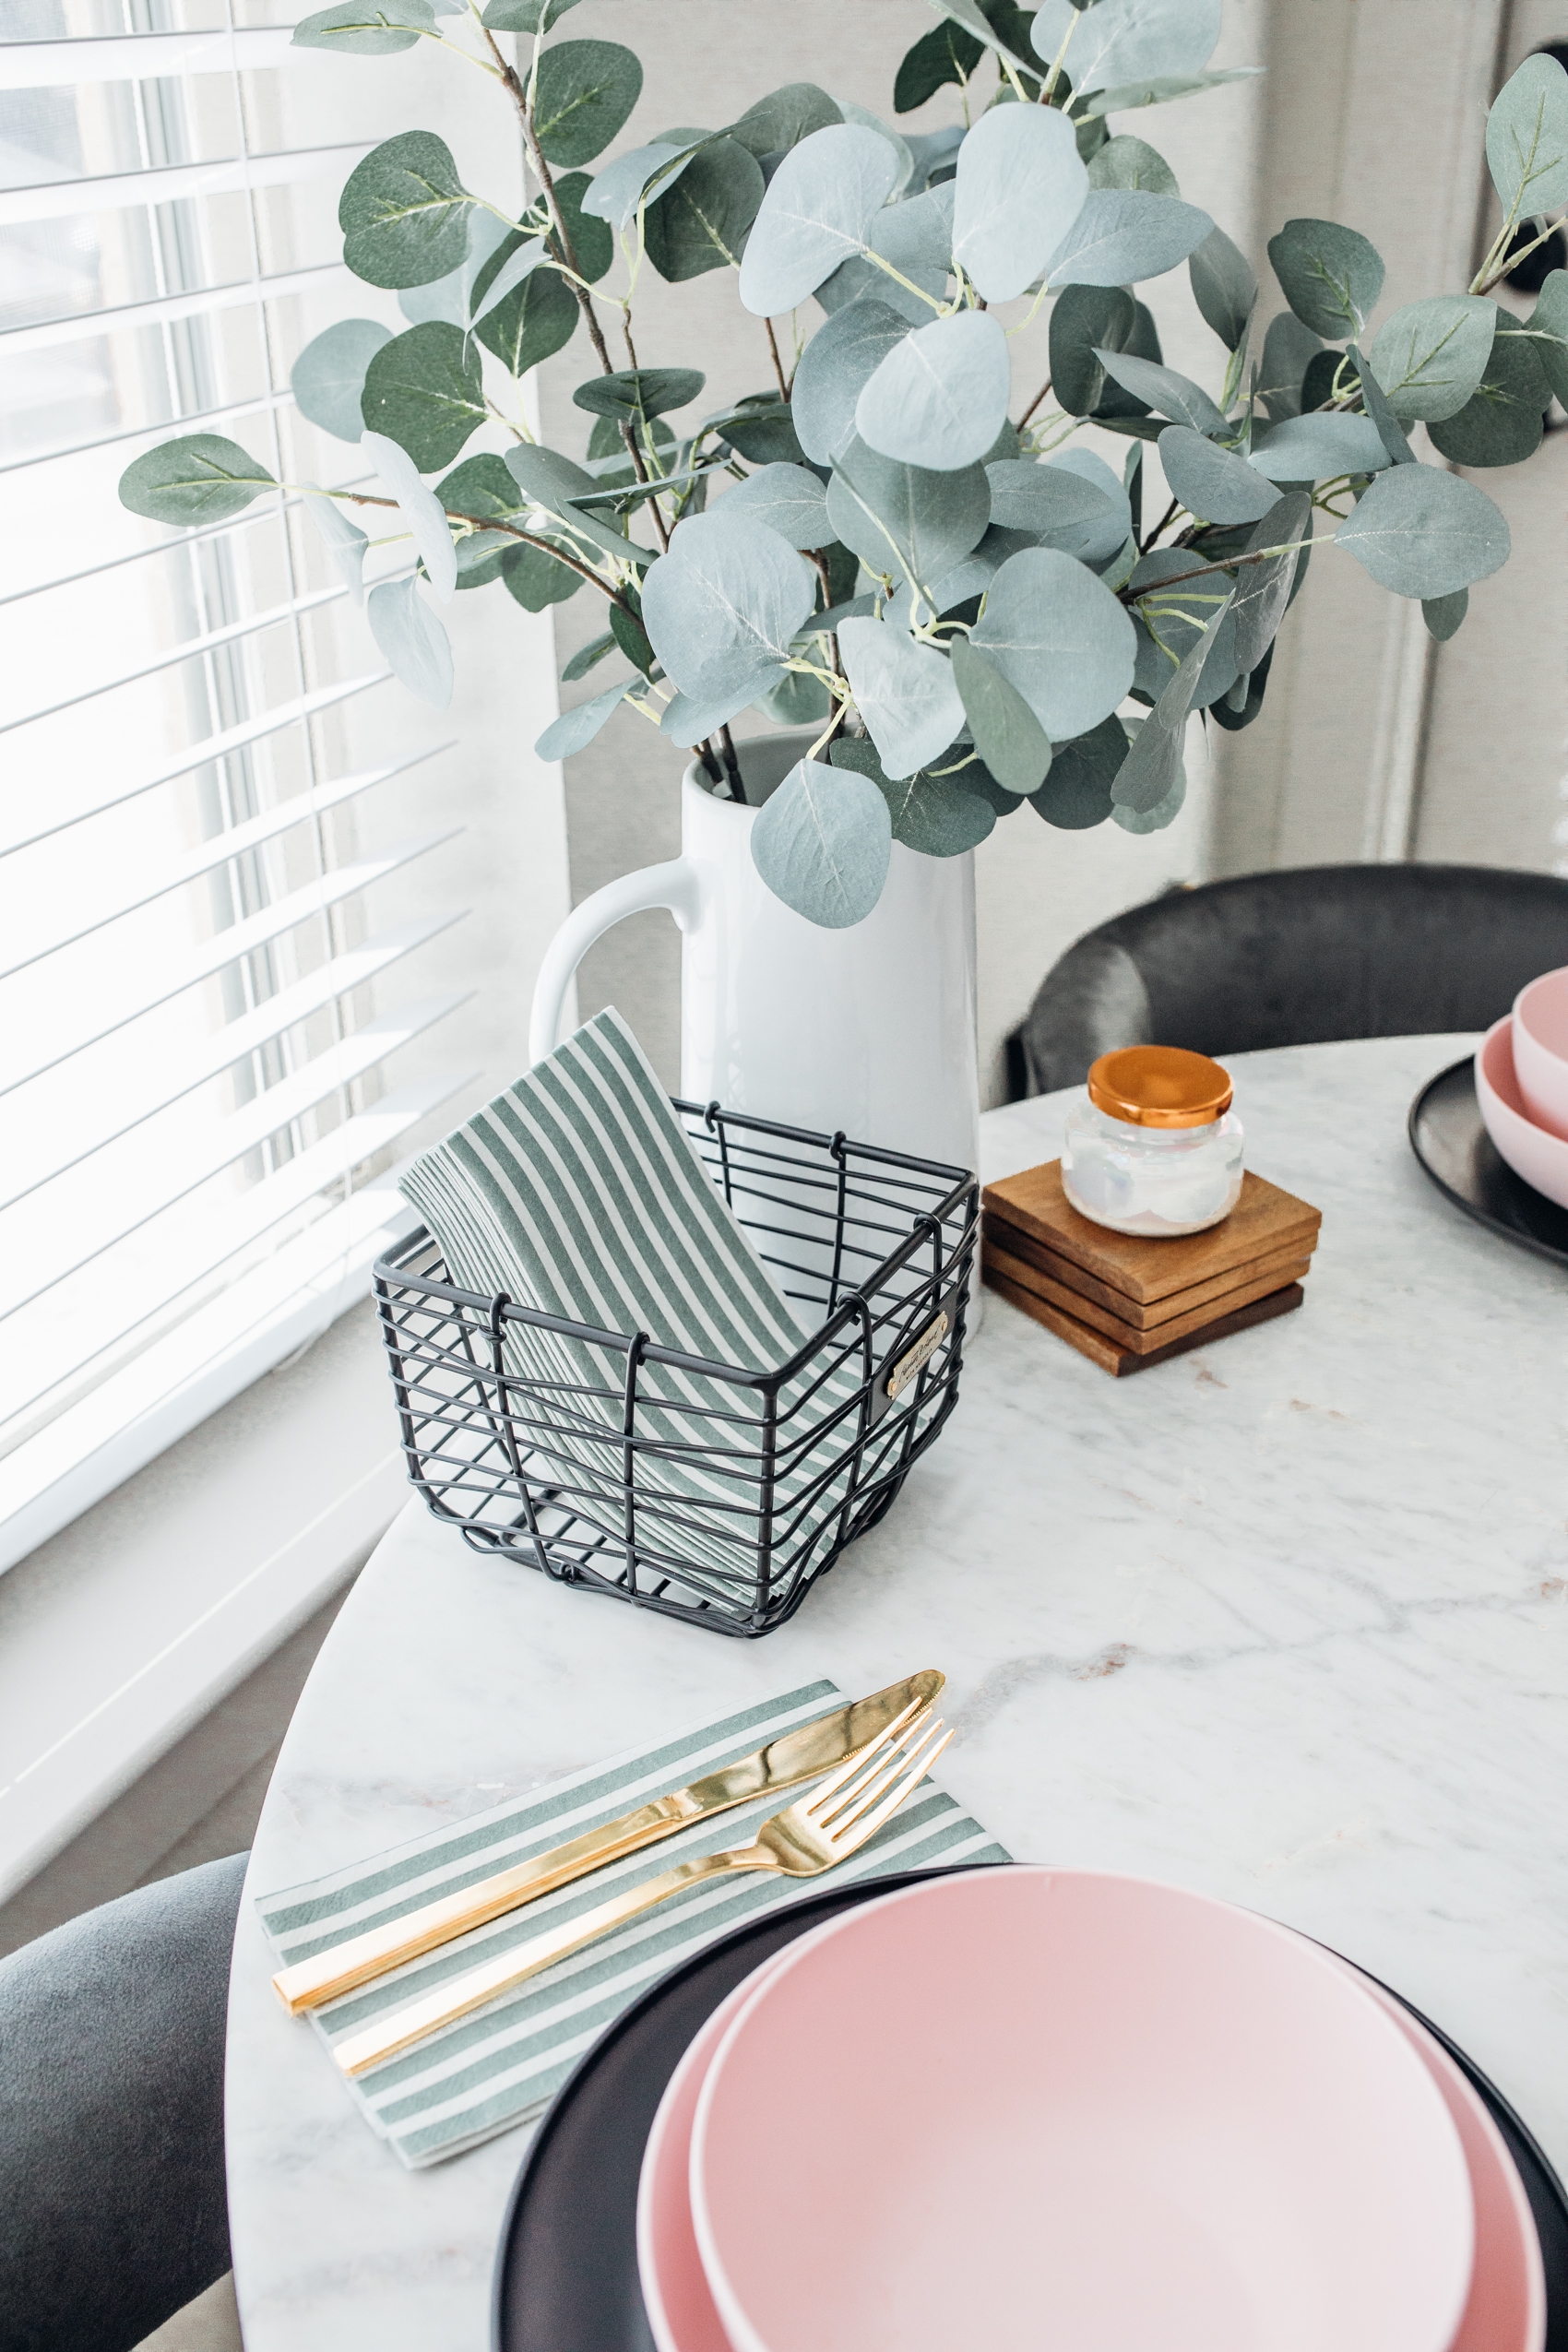 Dining room decor ideas with affordable table settings, gold flatware and a marble table